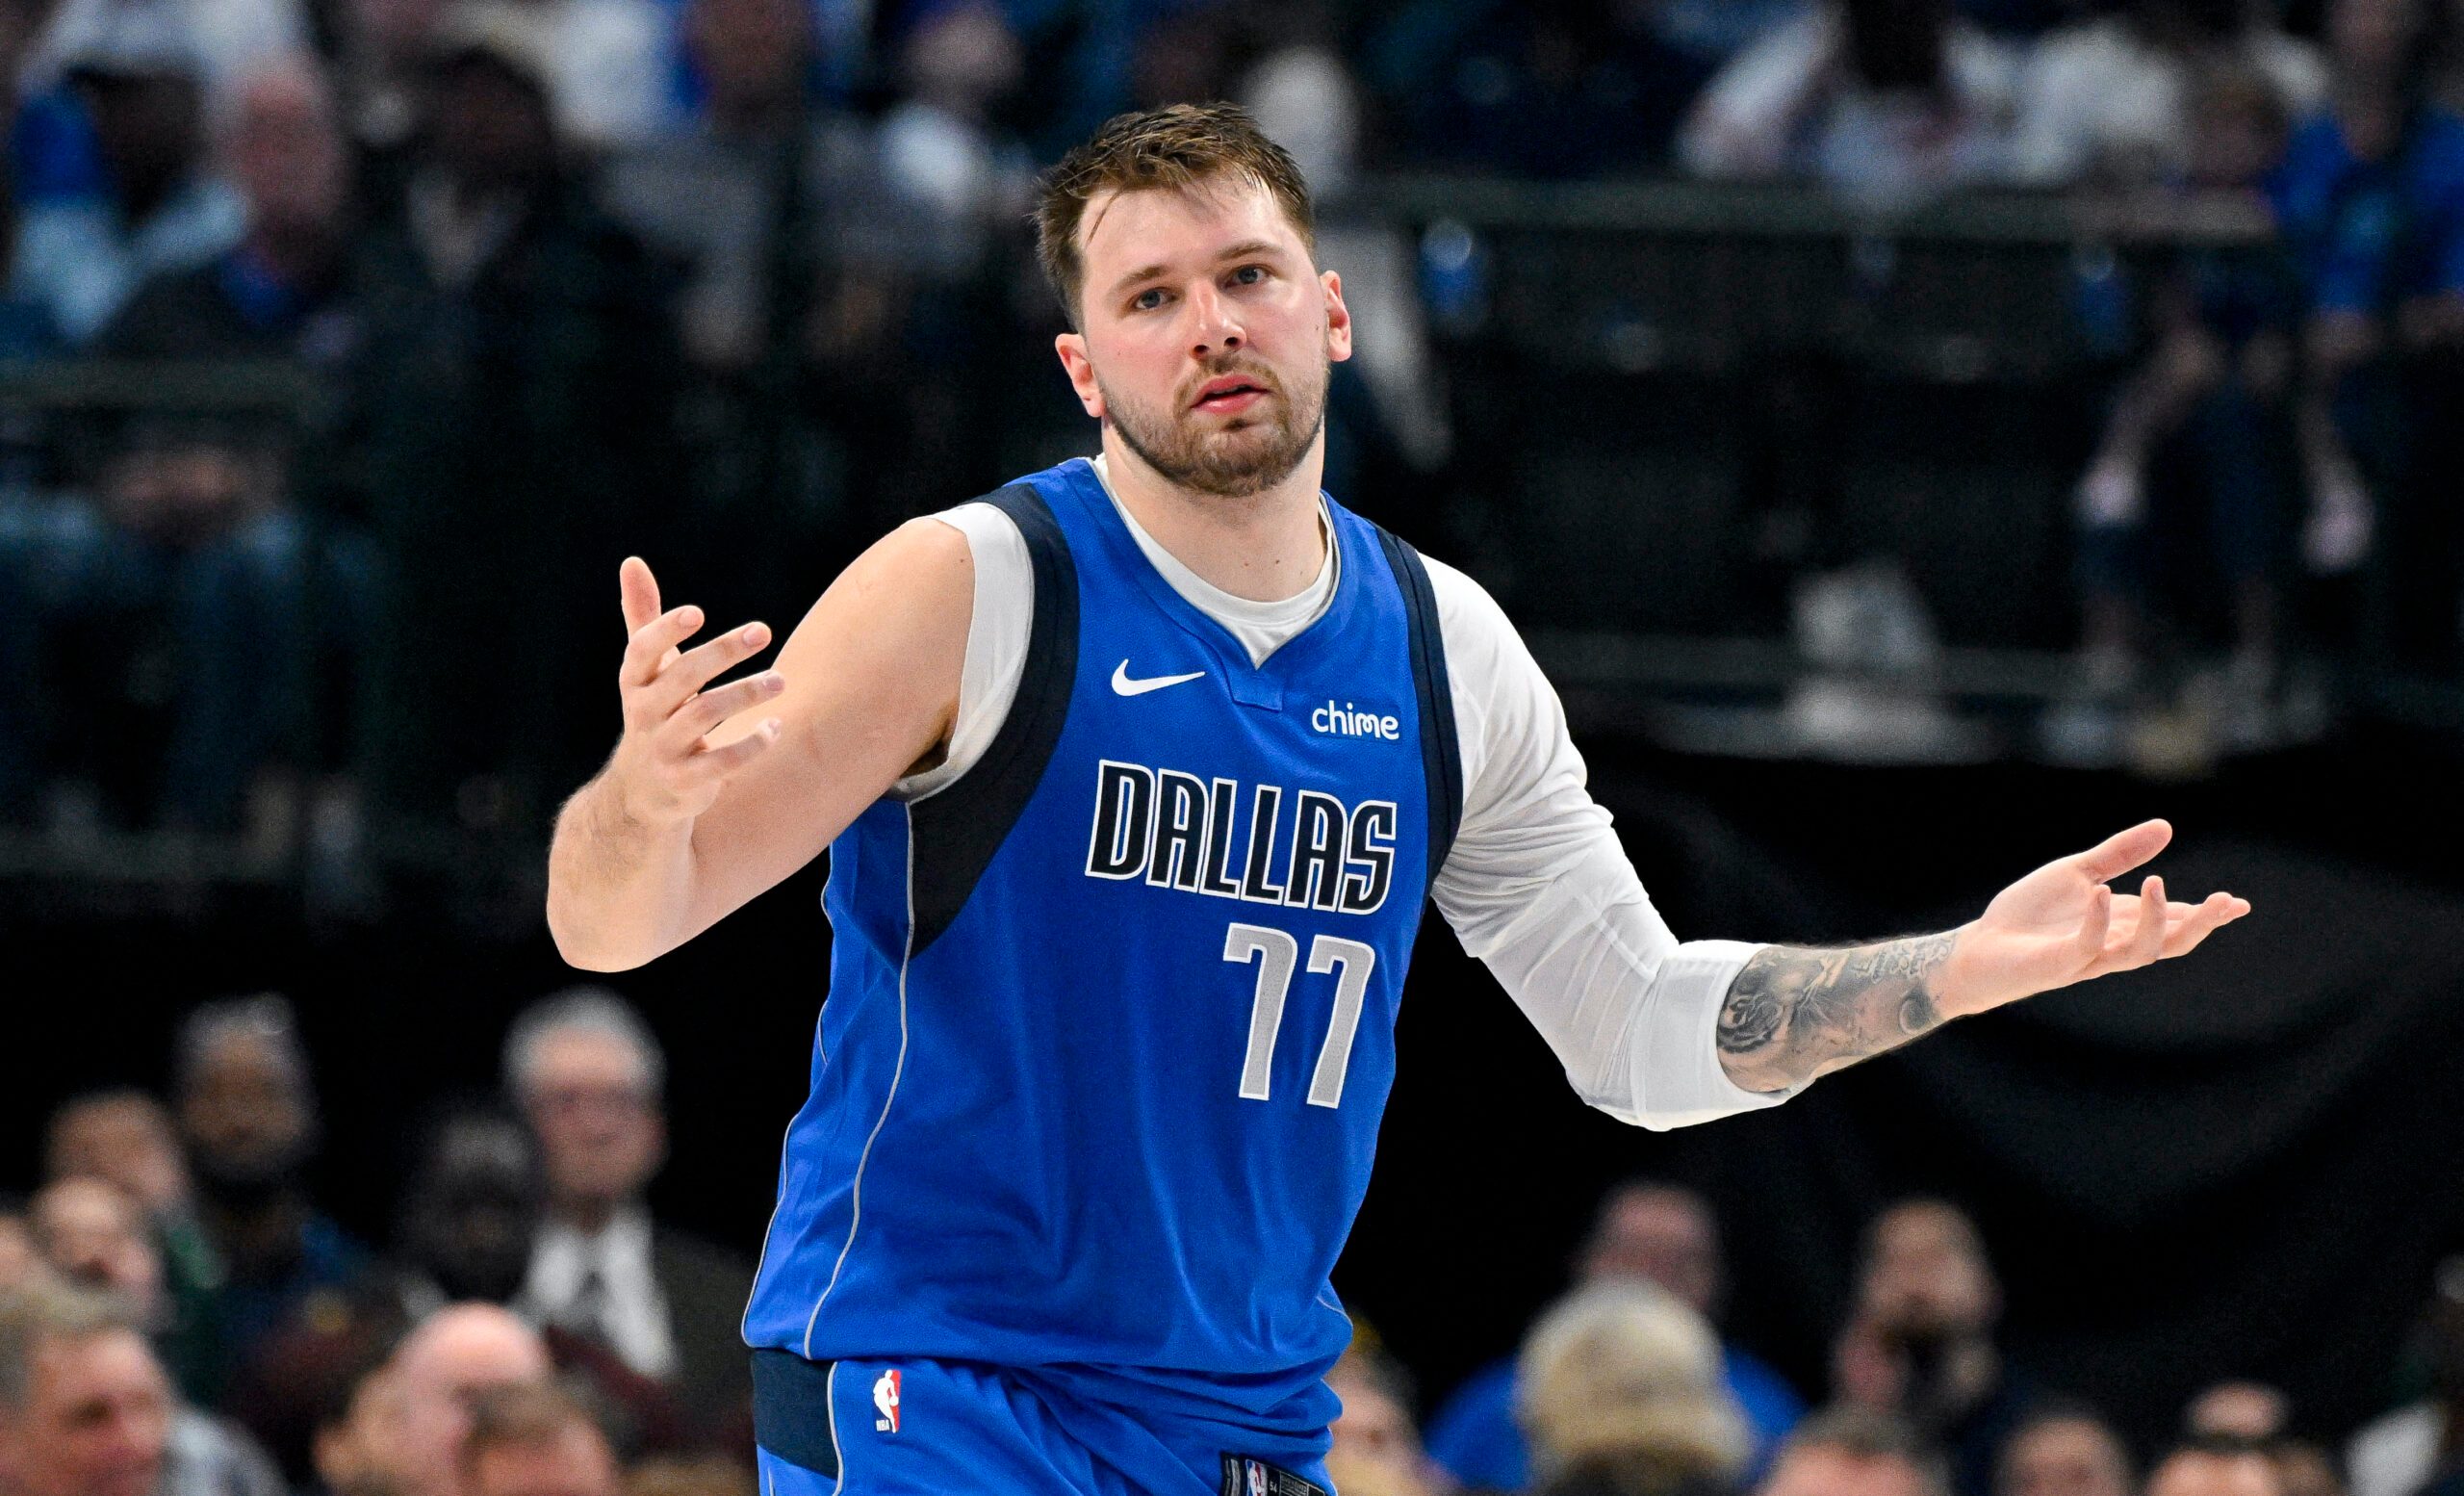 Luka Doncic looks to stretch triple-double roll against Warriors